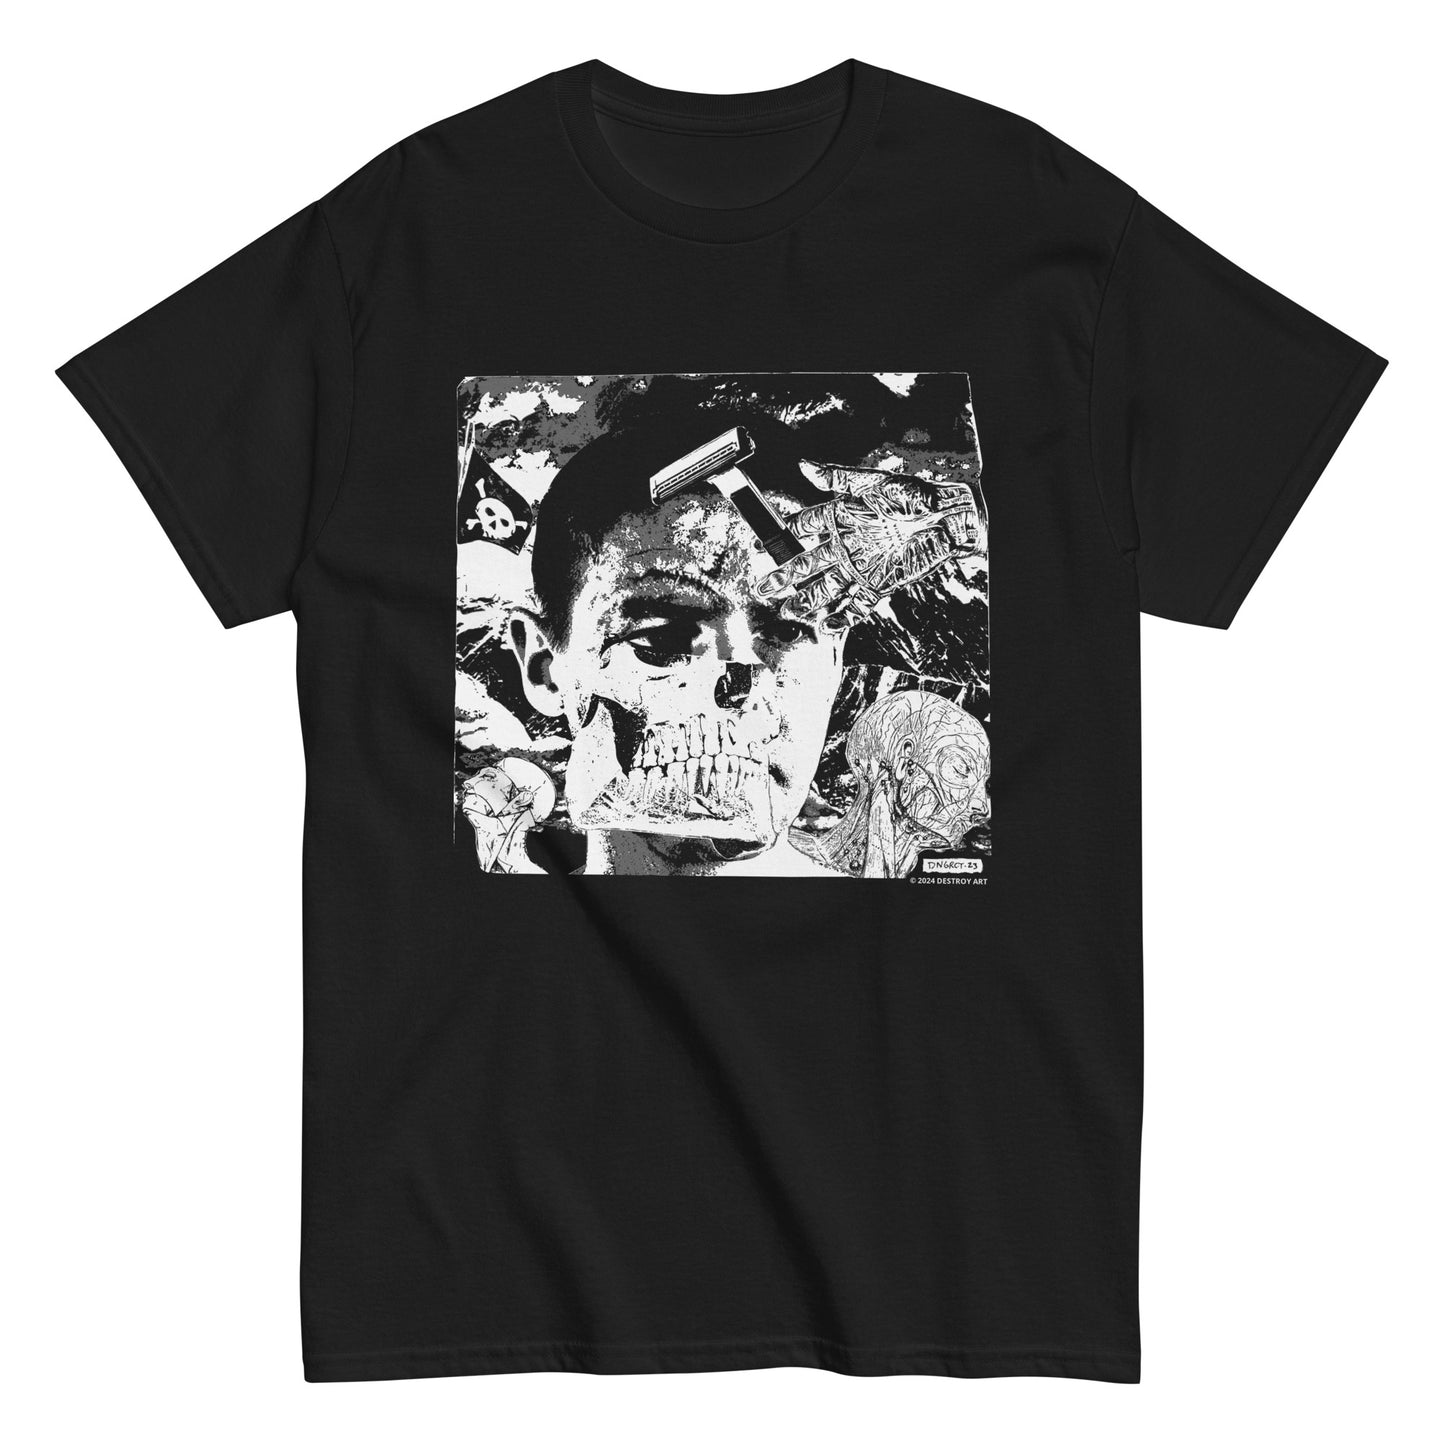 DNGRCT “Don’t Call Me Scarface” Tee